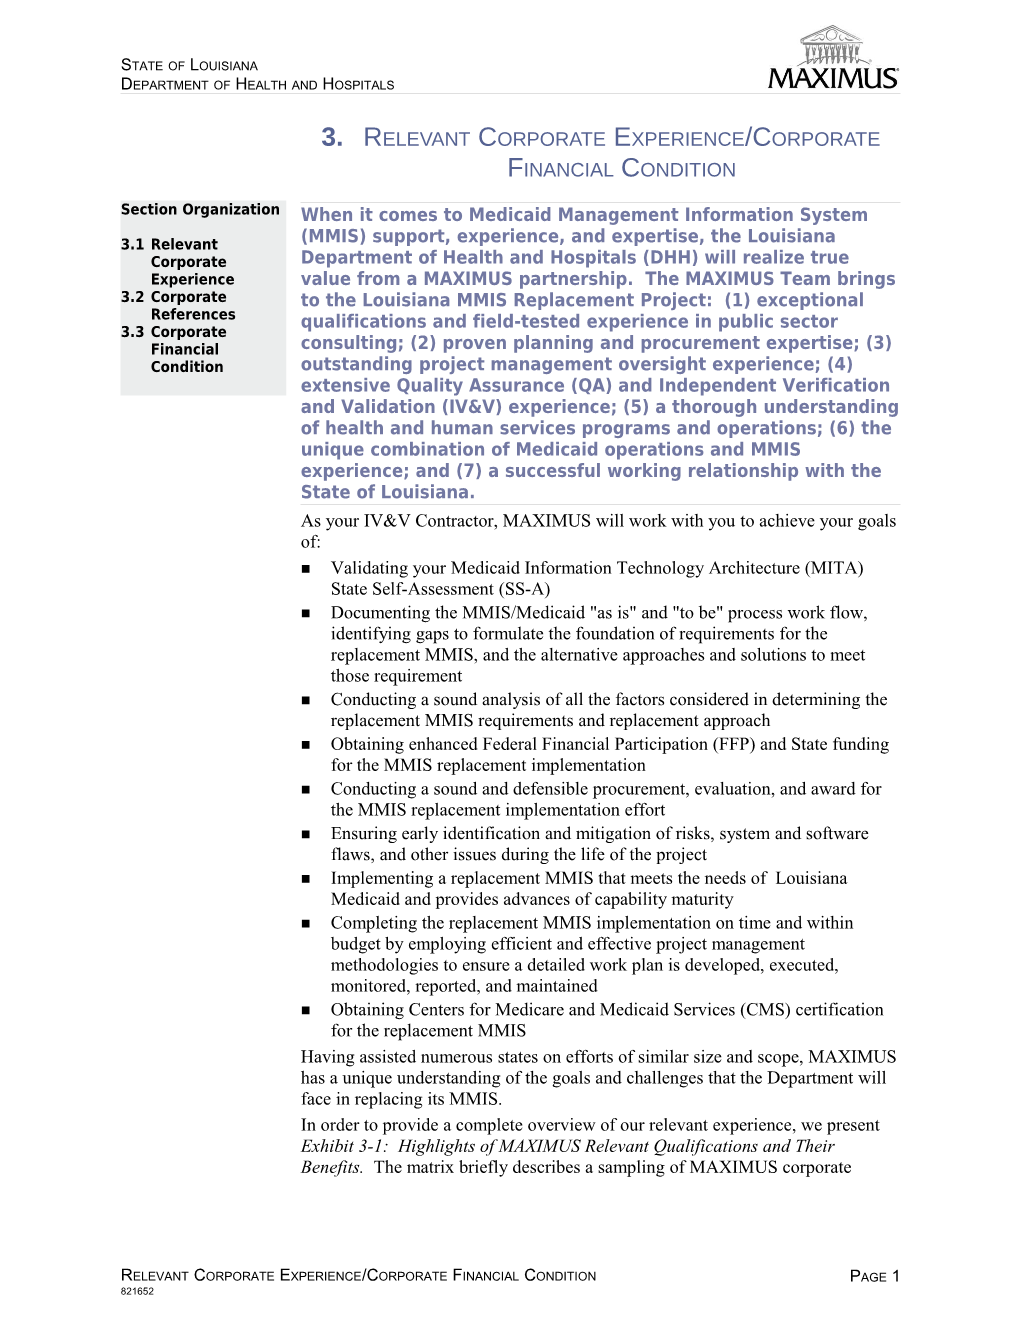 3.Relevant Corporate Experience/Corporate Financial Condition